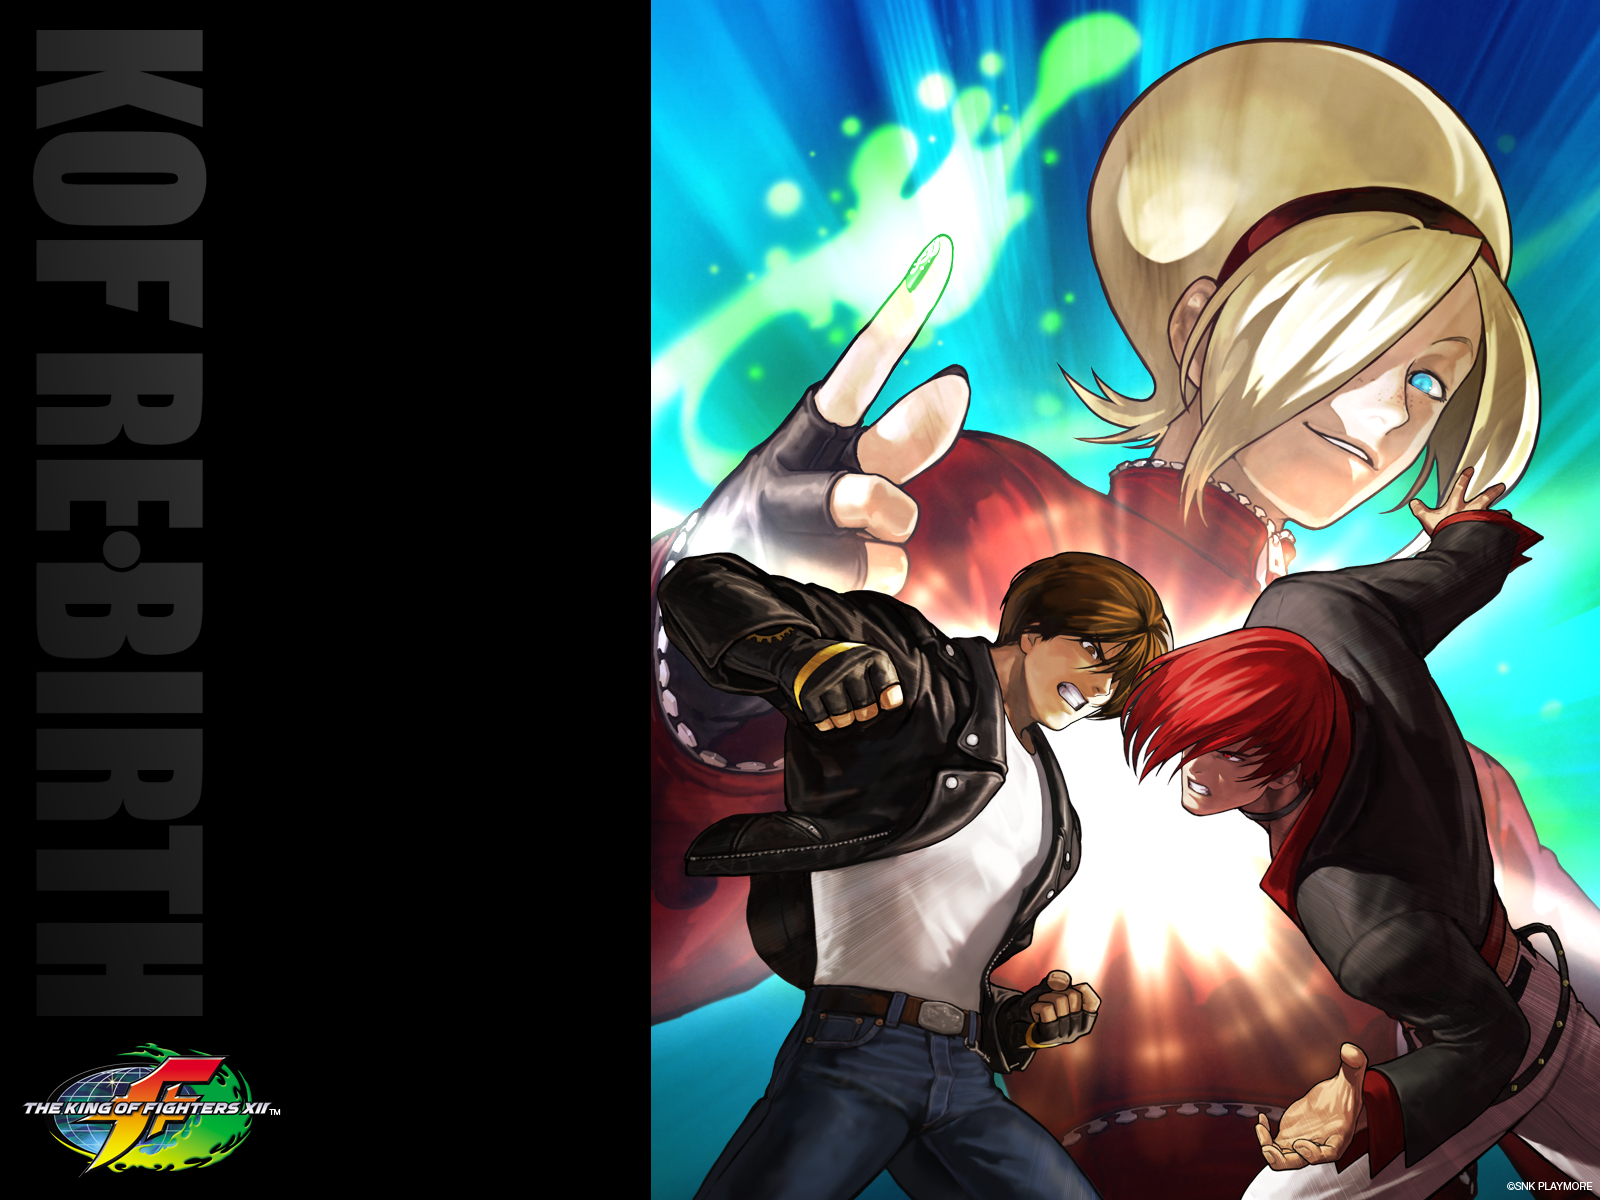 Wallpapers de The King of Fighters   Taringa 1600x1200